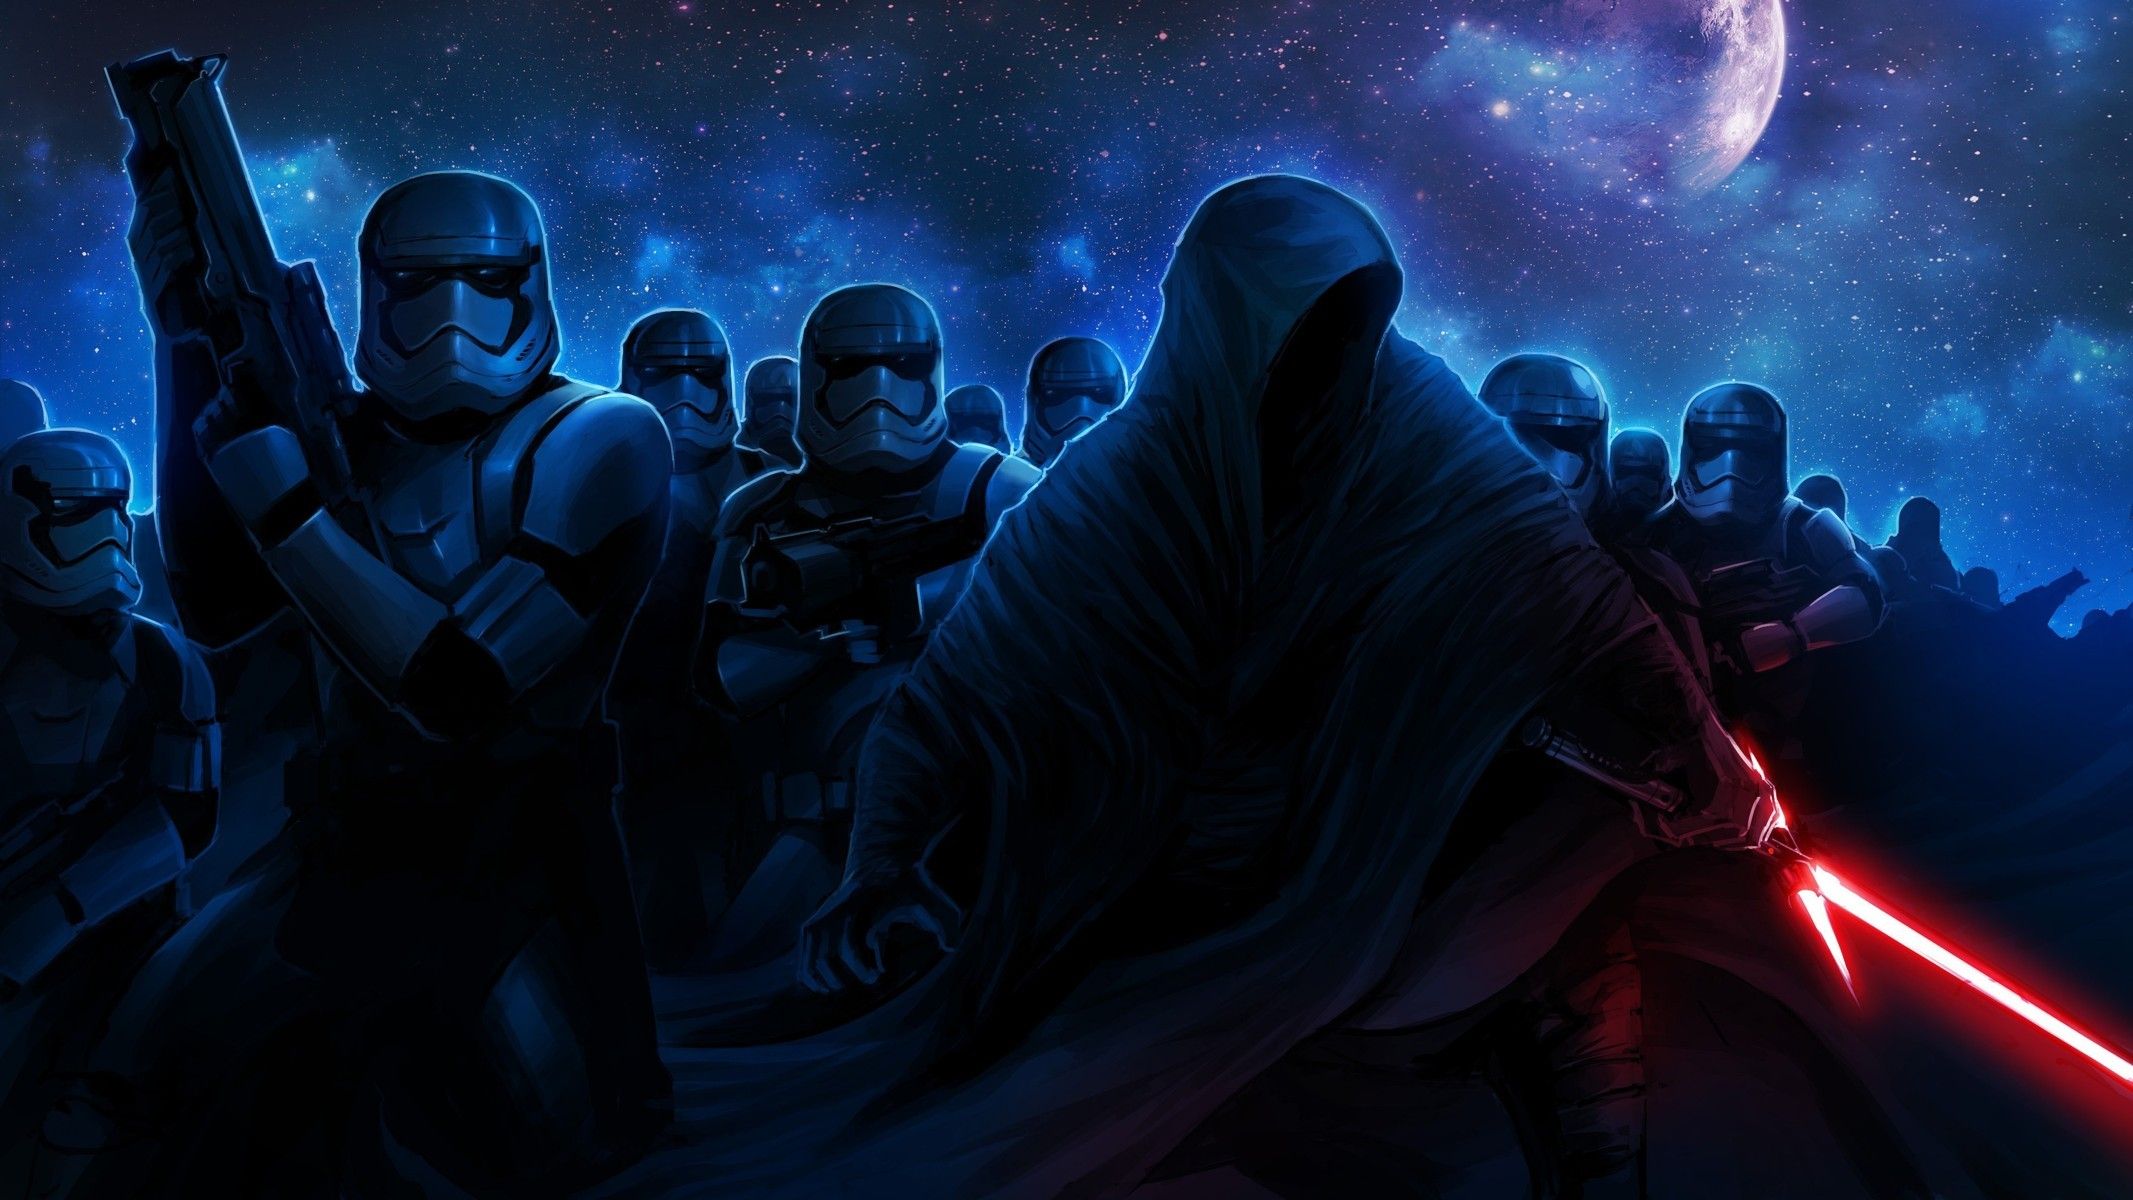 Cool Star Wars Background Hd. #7185 | wallpaperwide